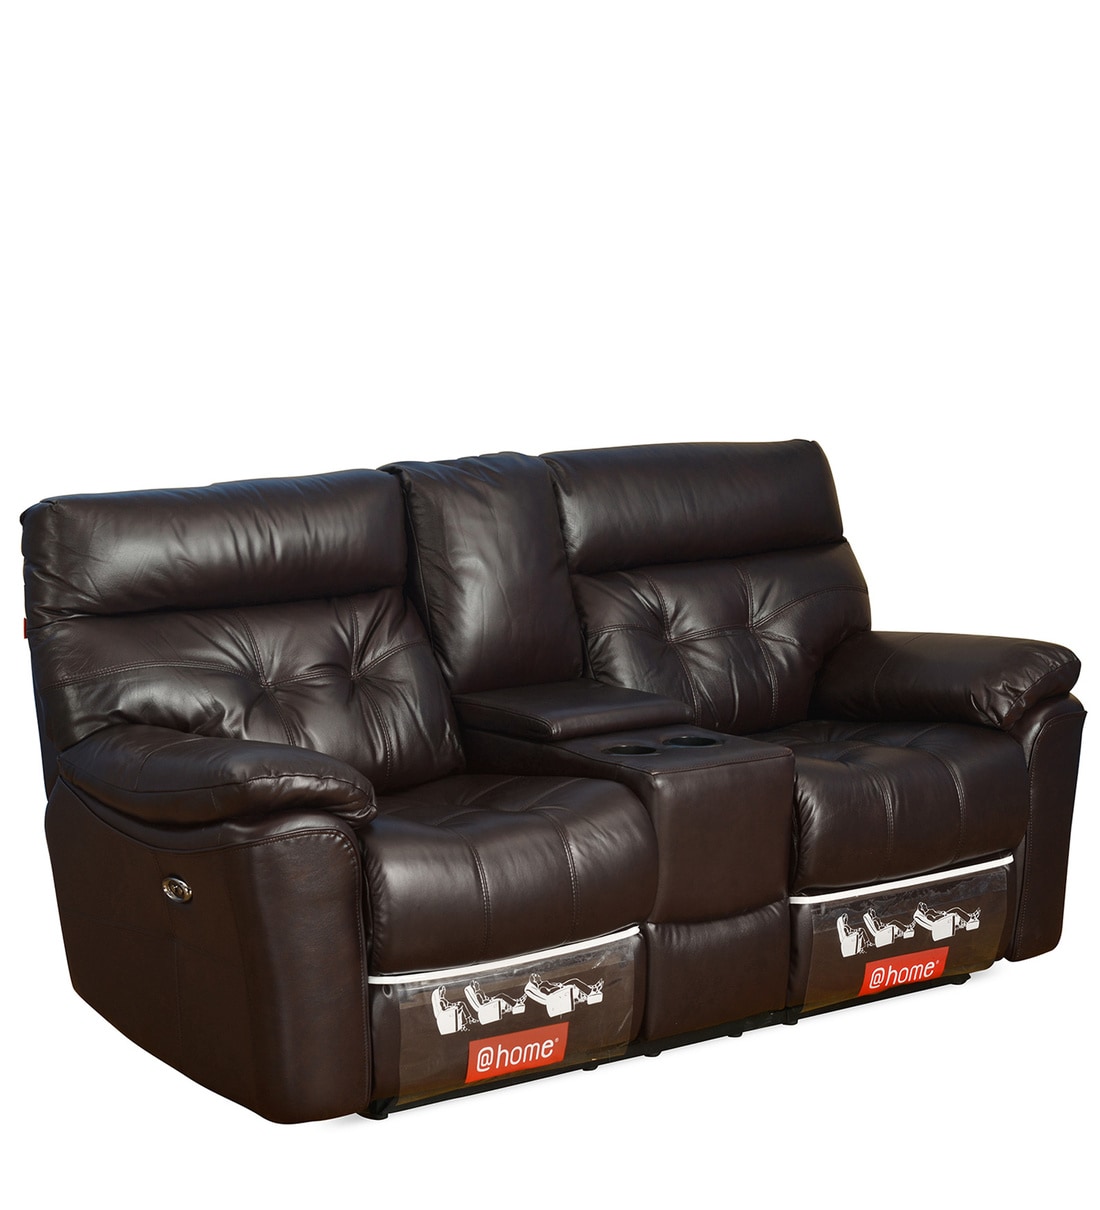 Buy Beverly Double Recliner Home Theater Sofa in Burgundy Colour Online -  Manual 2 Seater Recliners - Recliners - Furniture - Pepperfry Product